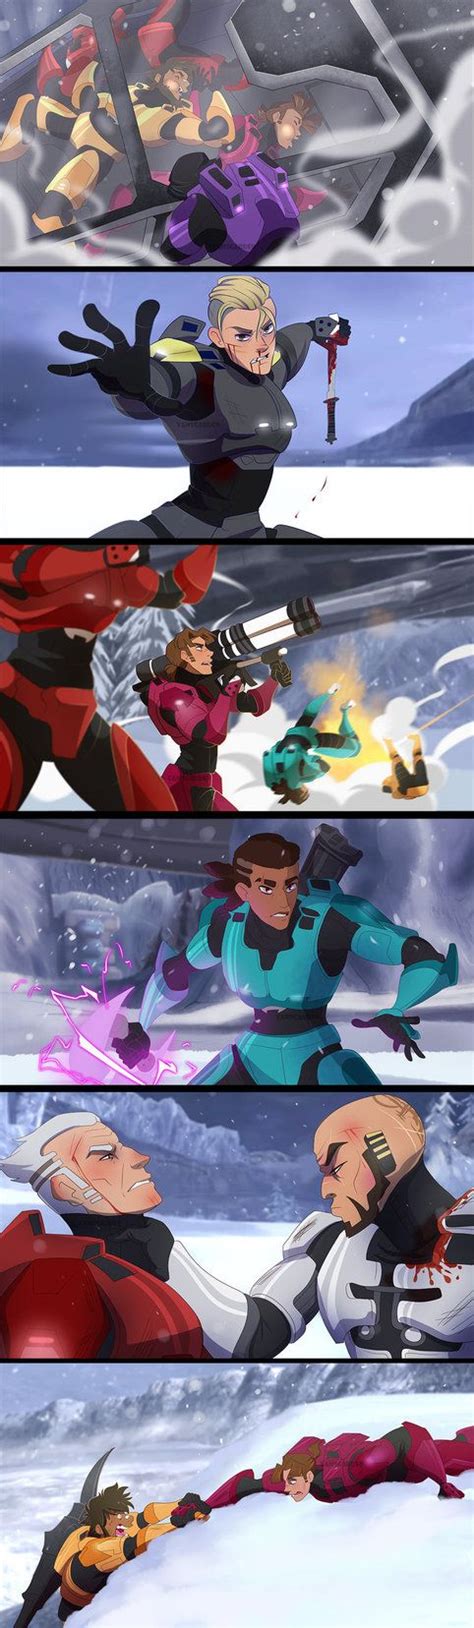 Red VS Blue Screenshots Redraws By YAMsgarden On DeviantArt Red Vs Blue Characters Red Vs